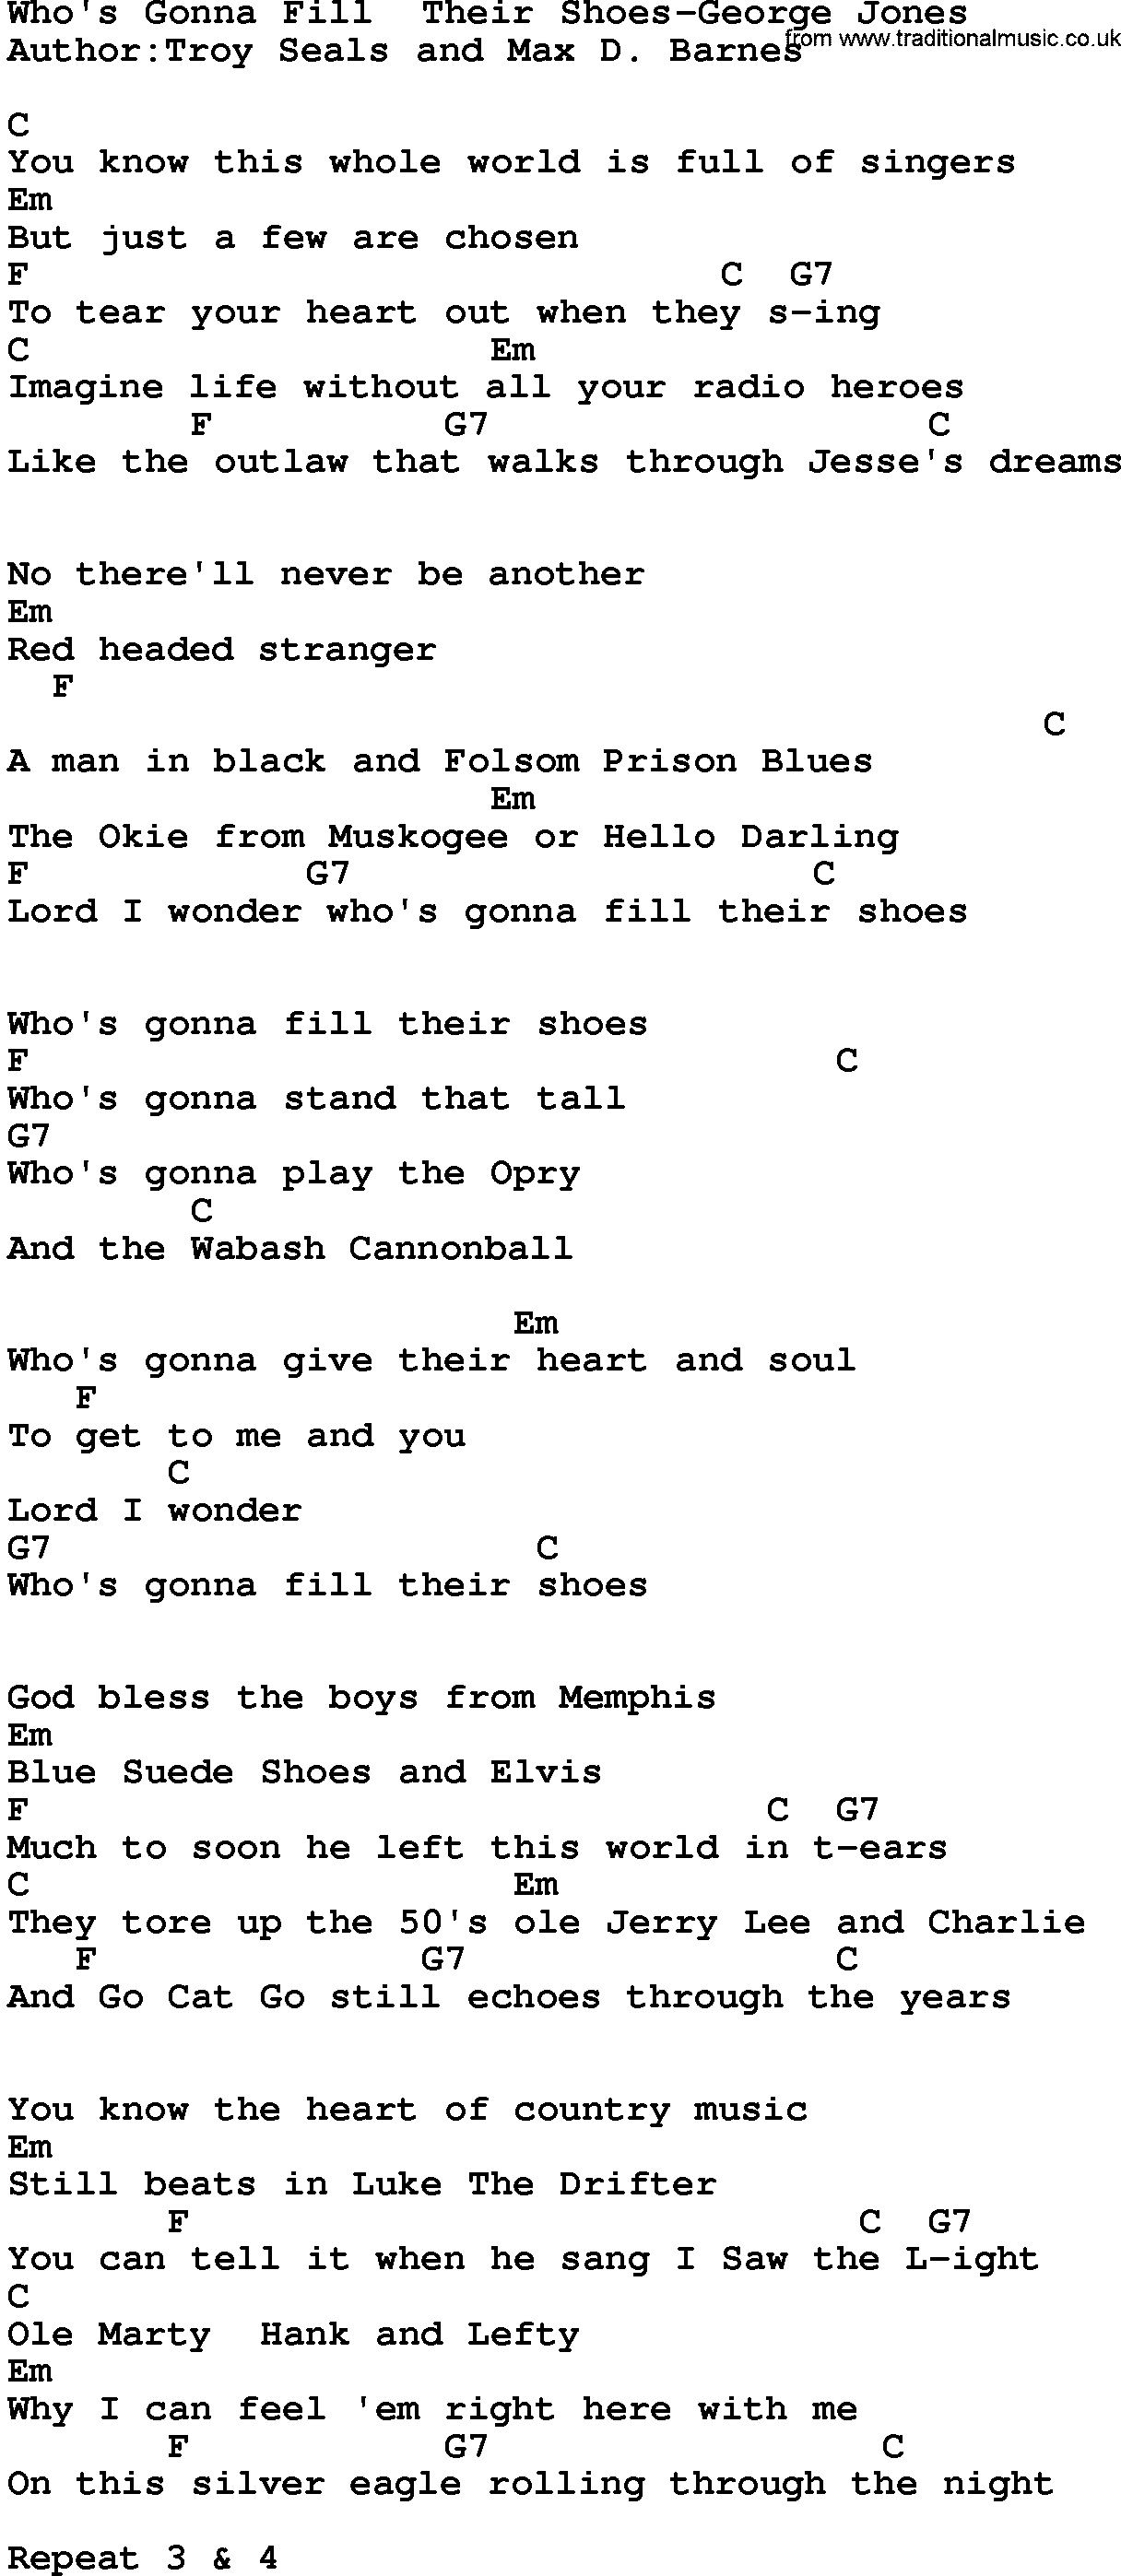 Country music song: Who's Gonna Fill Their Shoes-George Jones lyrics and chords